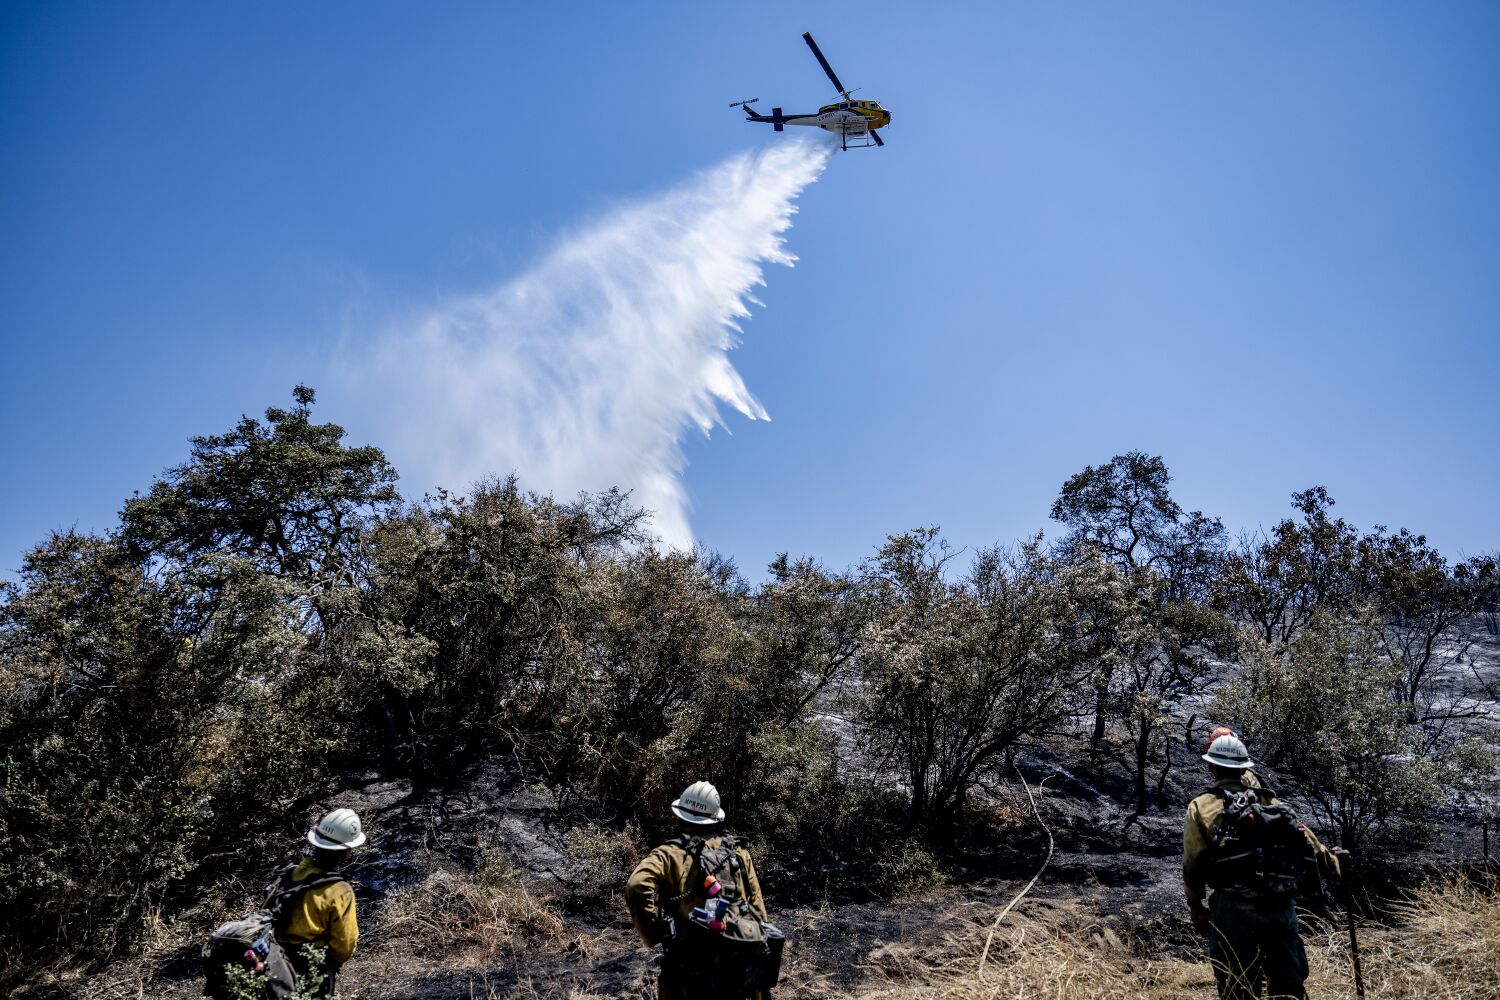 Firefighters battle 7,600-acre wildfire in Riverside County as heat wave scorches California